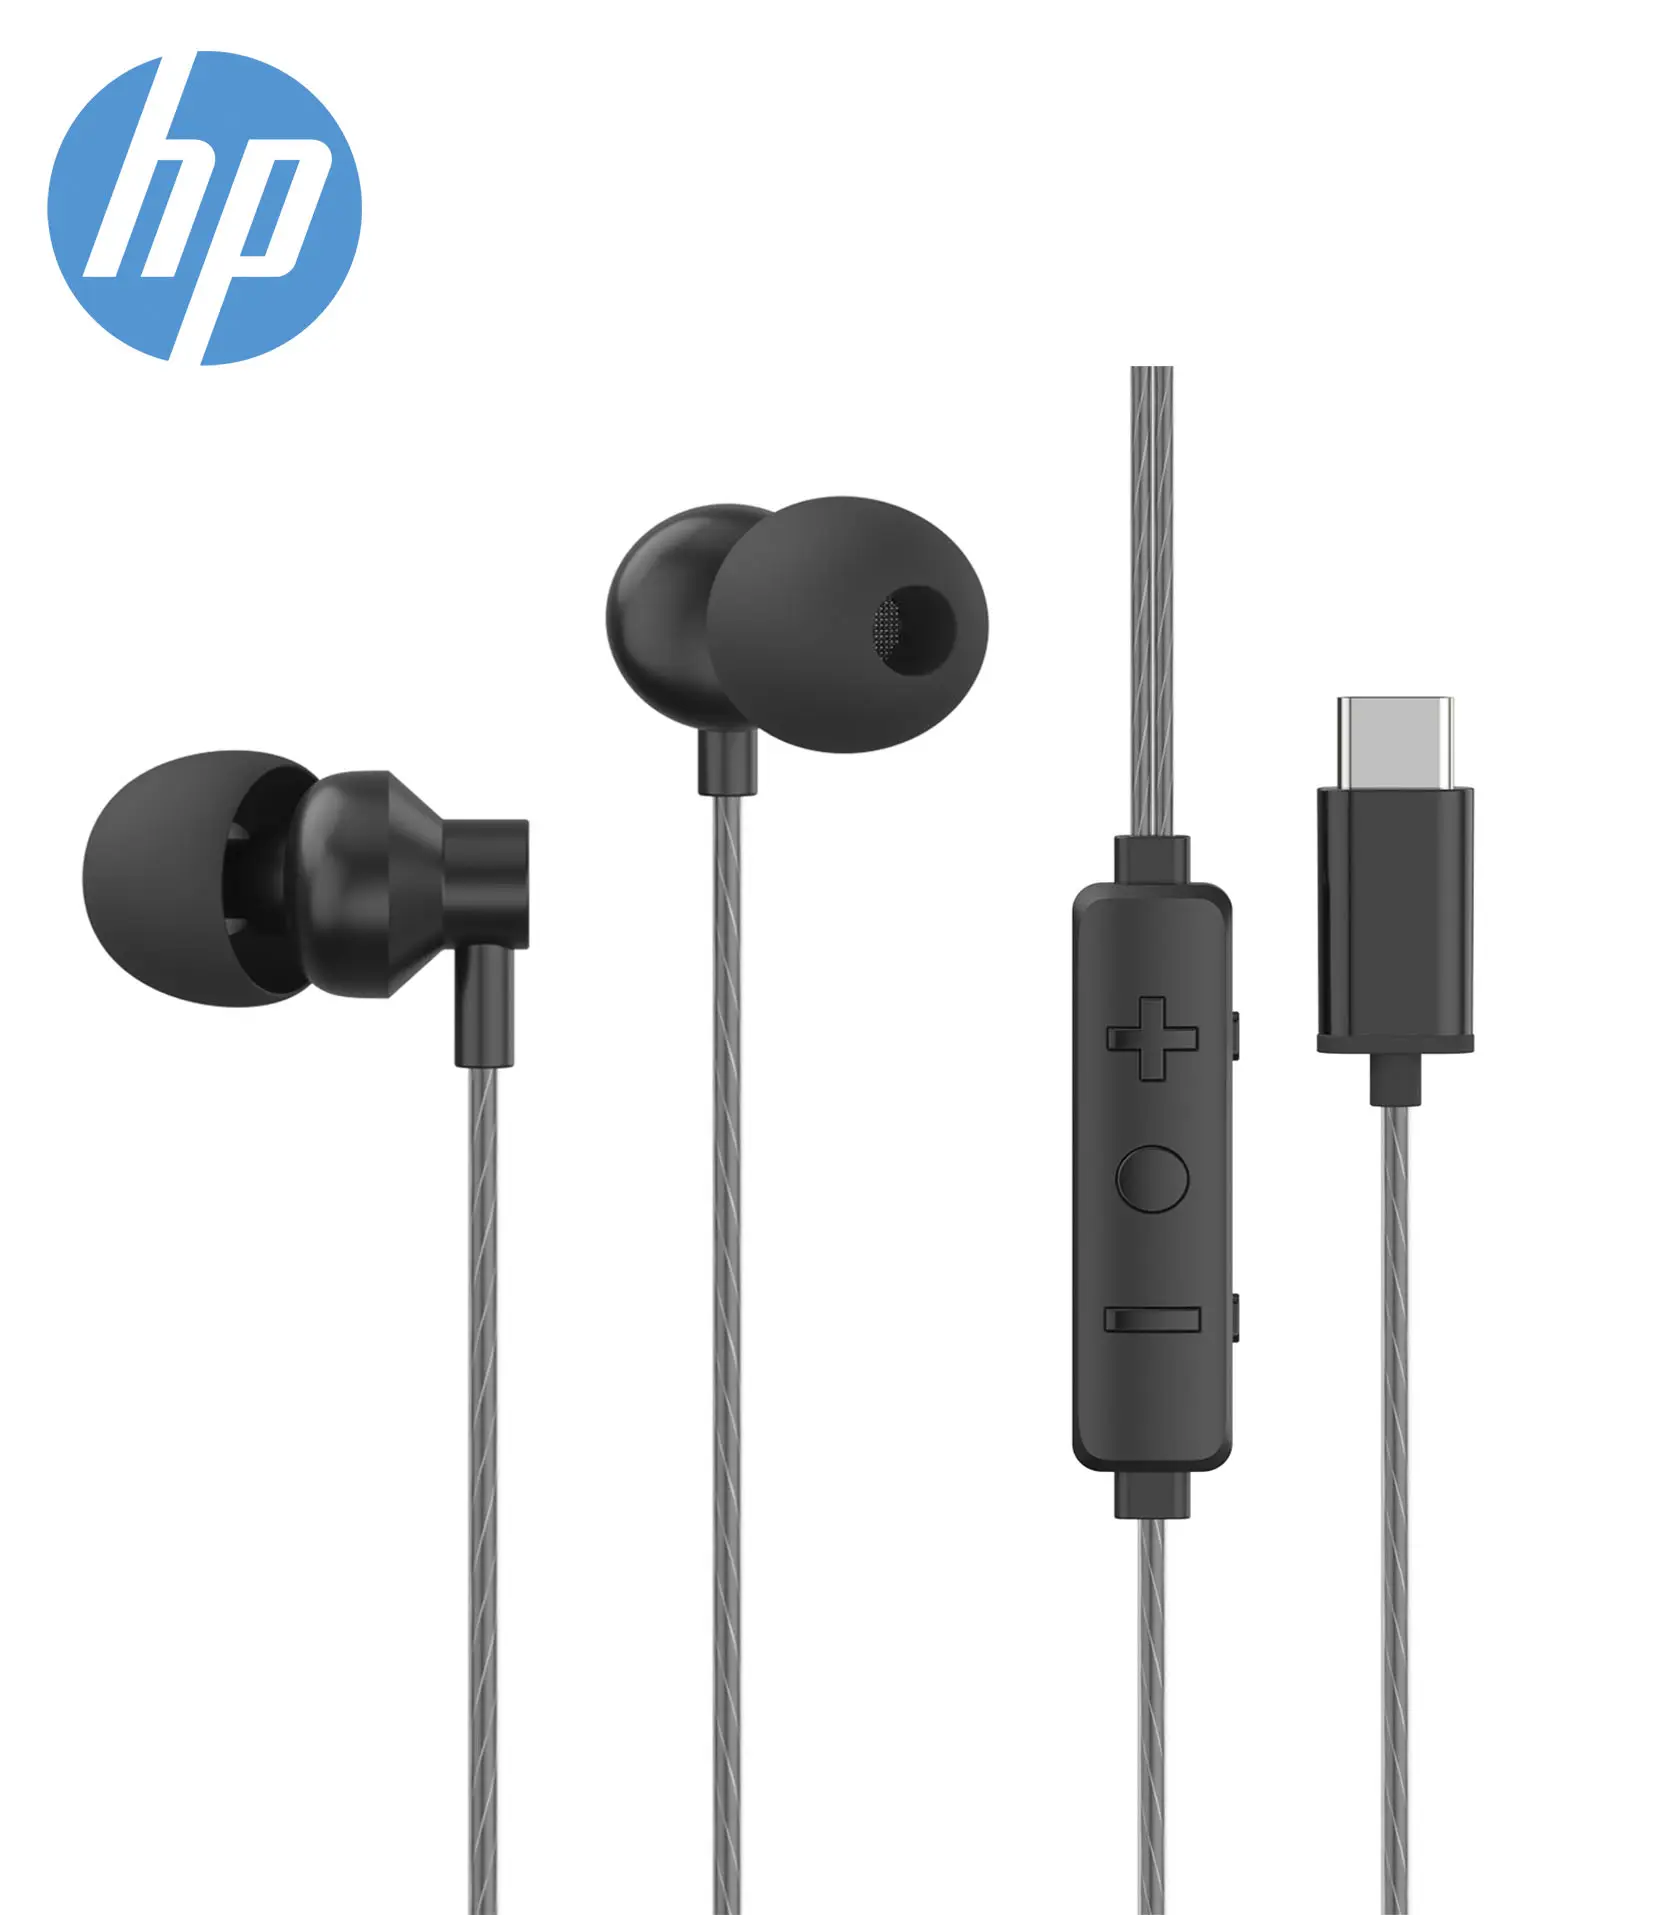 HP DHH-1127 Top Seller Type C Aluminum Wired Headphones For Iphone Earphones With Volume Control